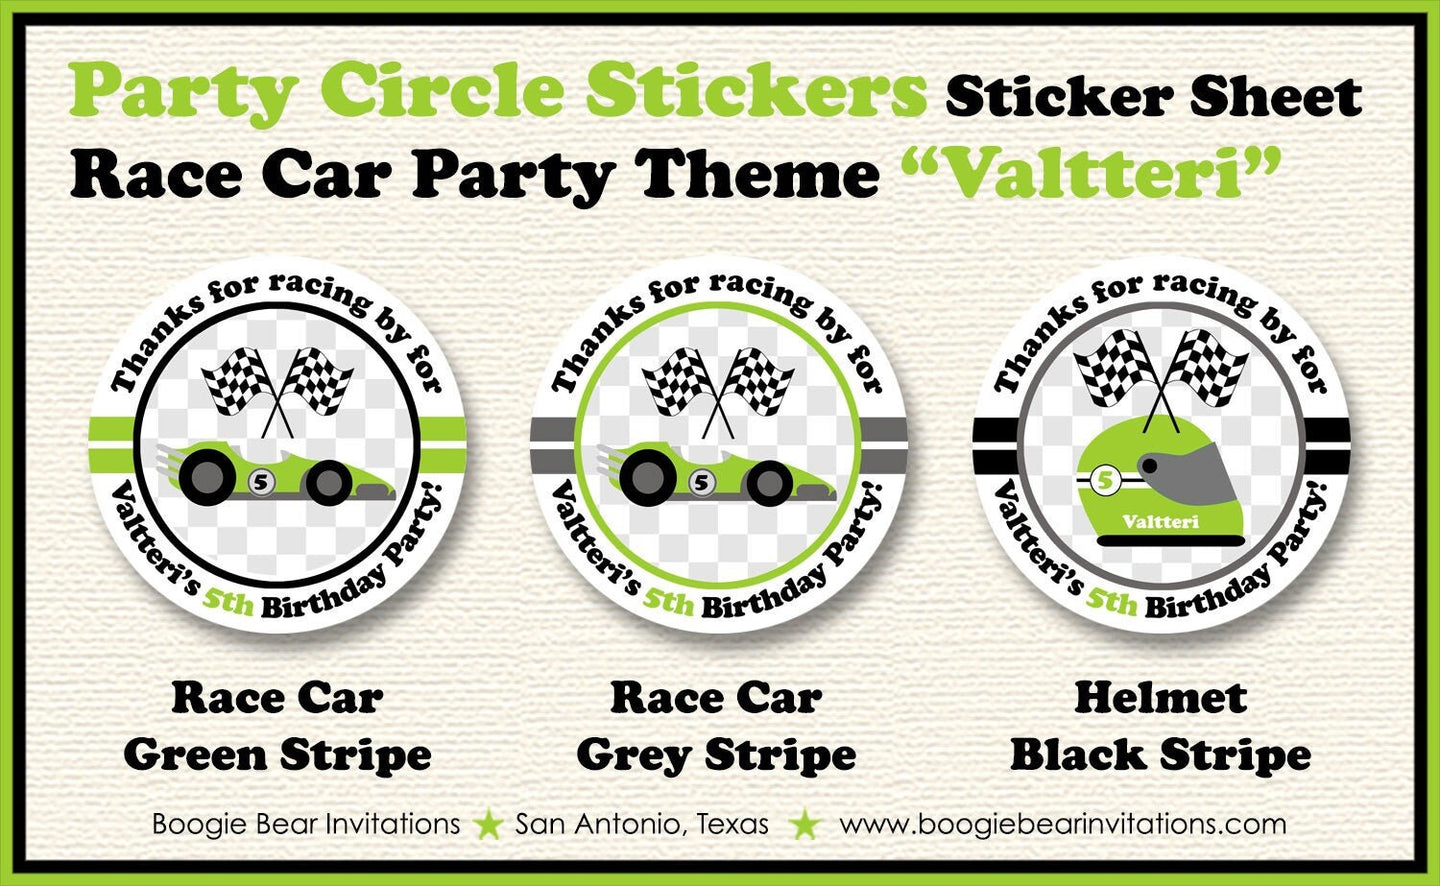 Race Car Birthday Party Circle Stickers Sheet Round Lime Green Racing Grand Prix Race Track Boy Girl Boogie Bear Invitations Valtteri Theme